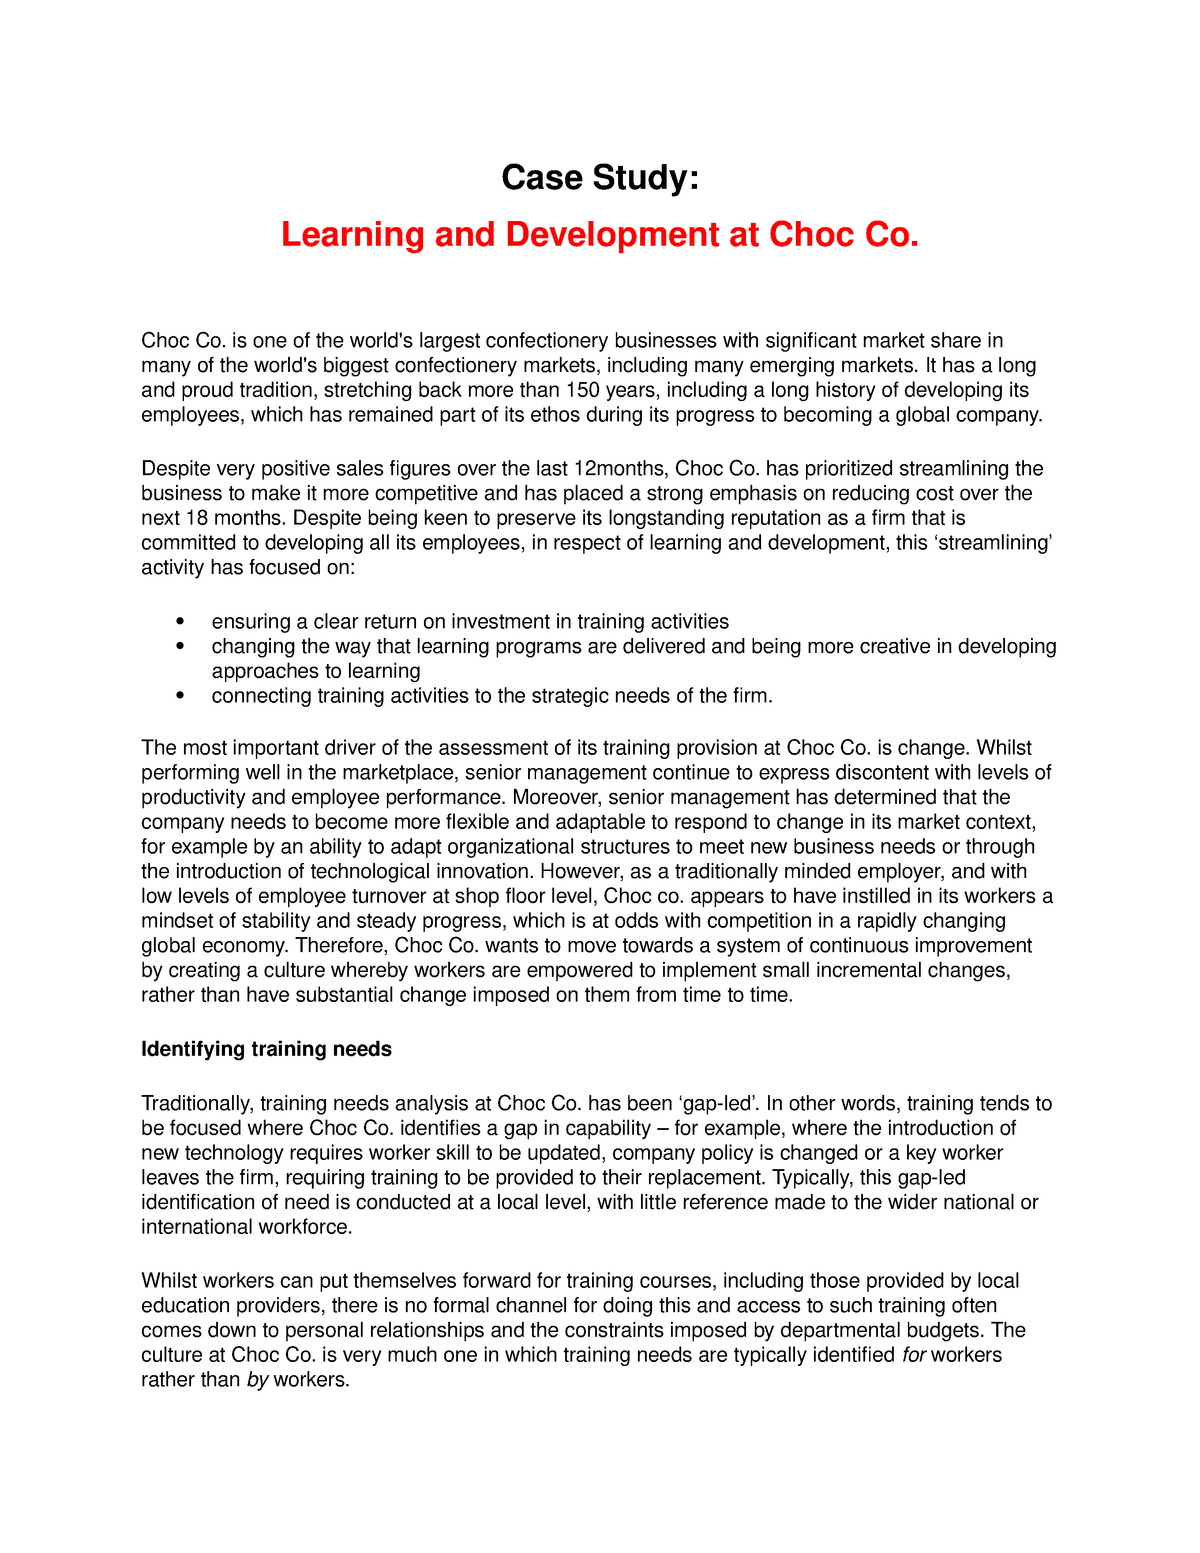 case study learning and development at choc co